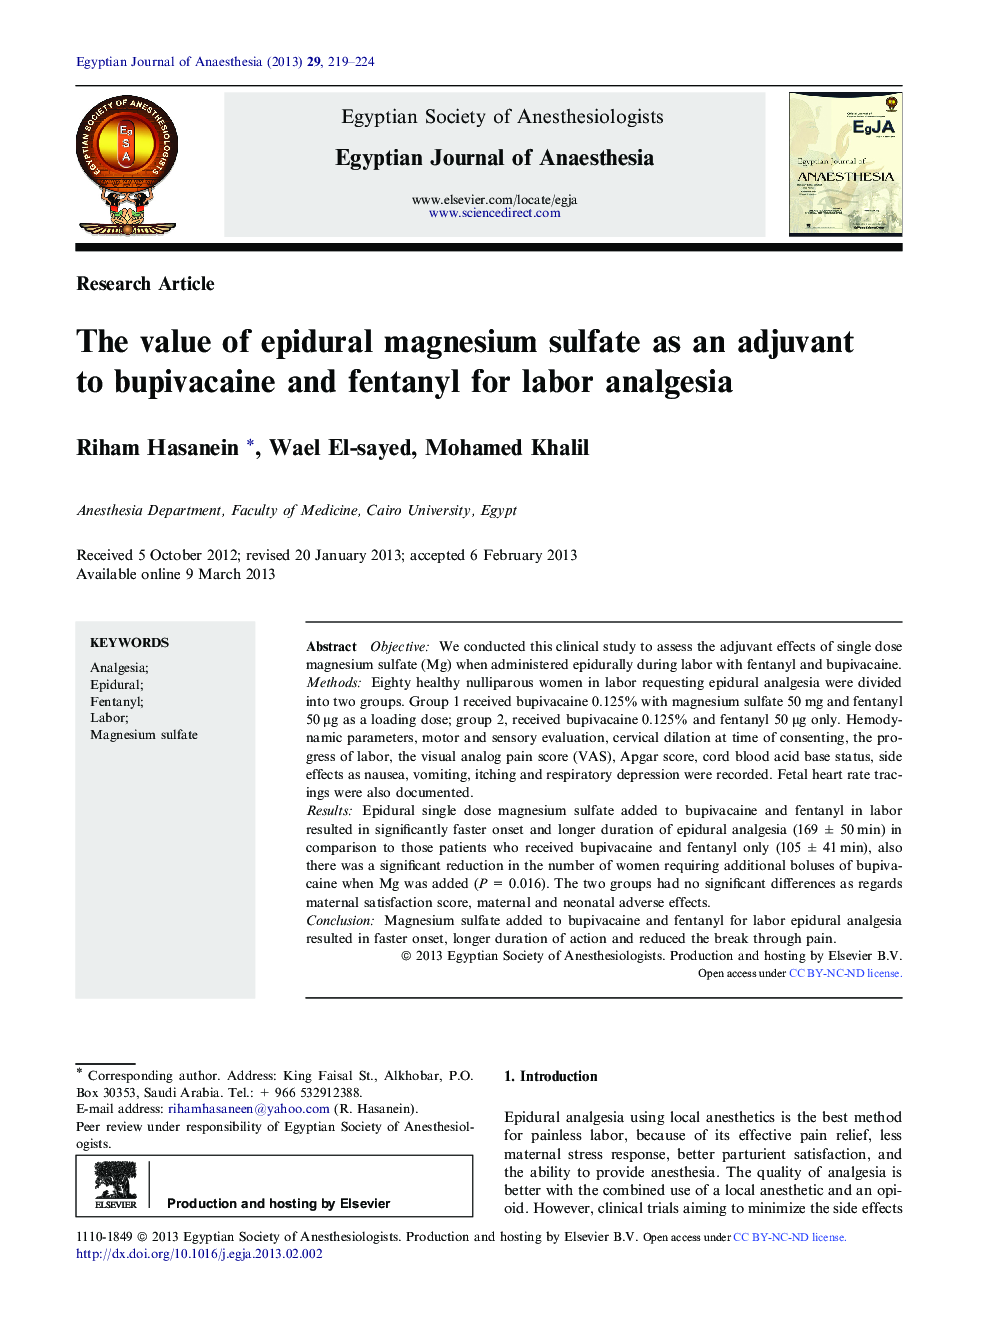 The value of epidural magnesium sulfate as an adjuvant to bupivacaine and fentanyl for labor analgesia 